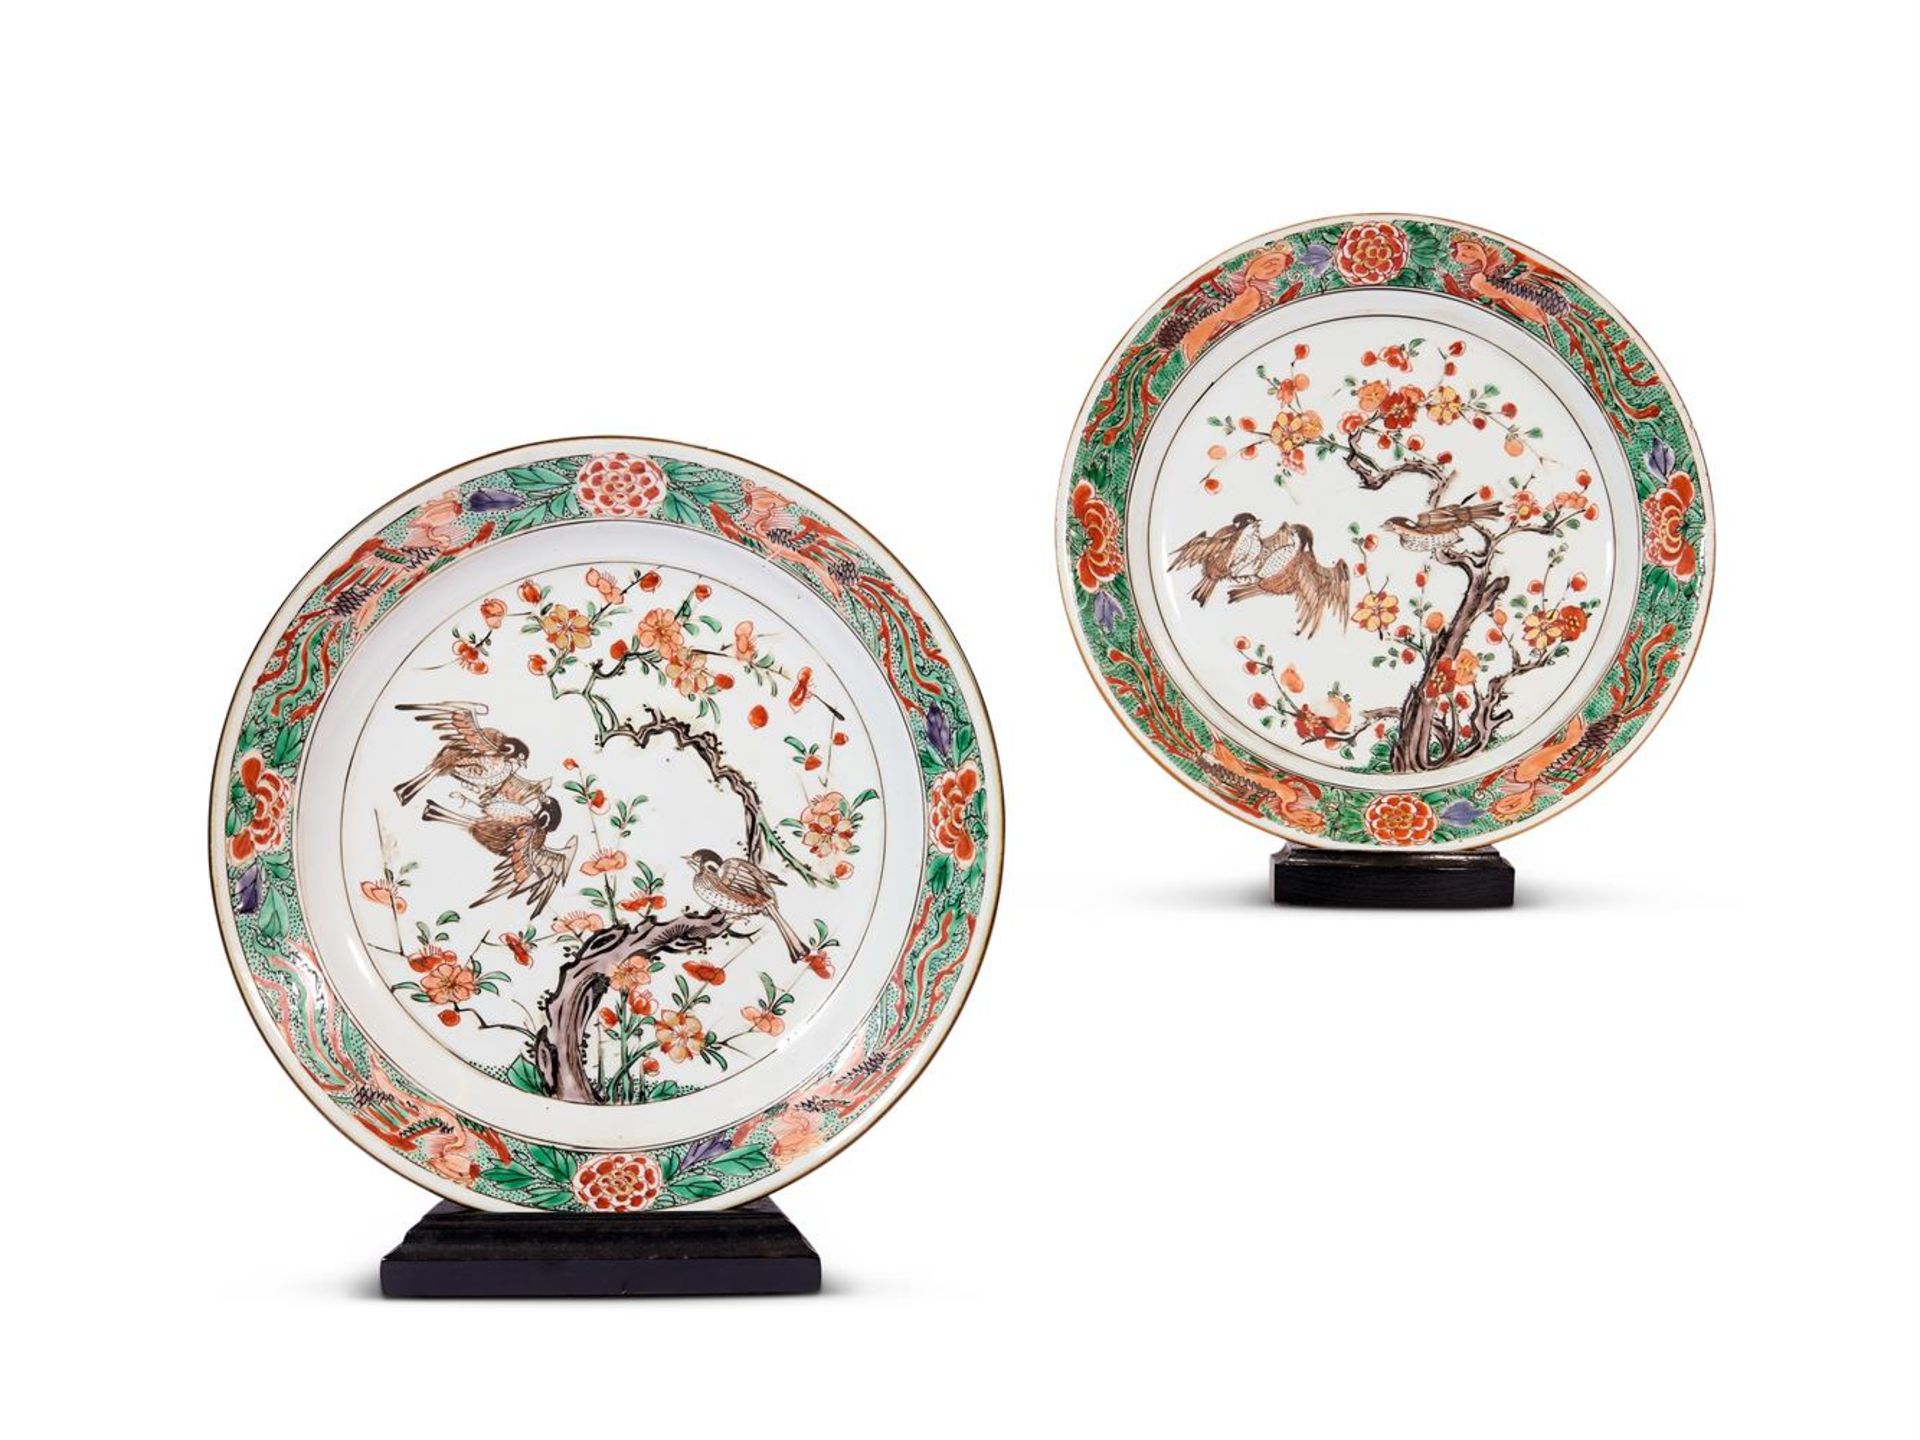 A PAIR OF CHINESE FAMILLE VERTE PLATES, QING DYNASTY